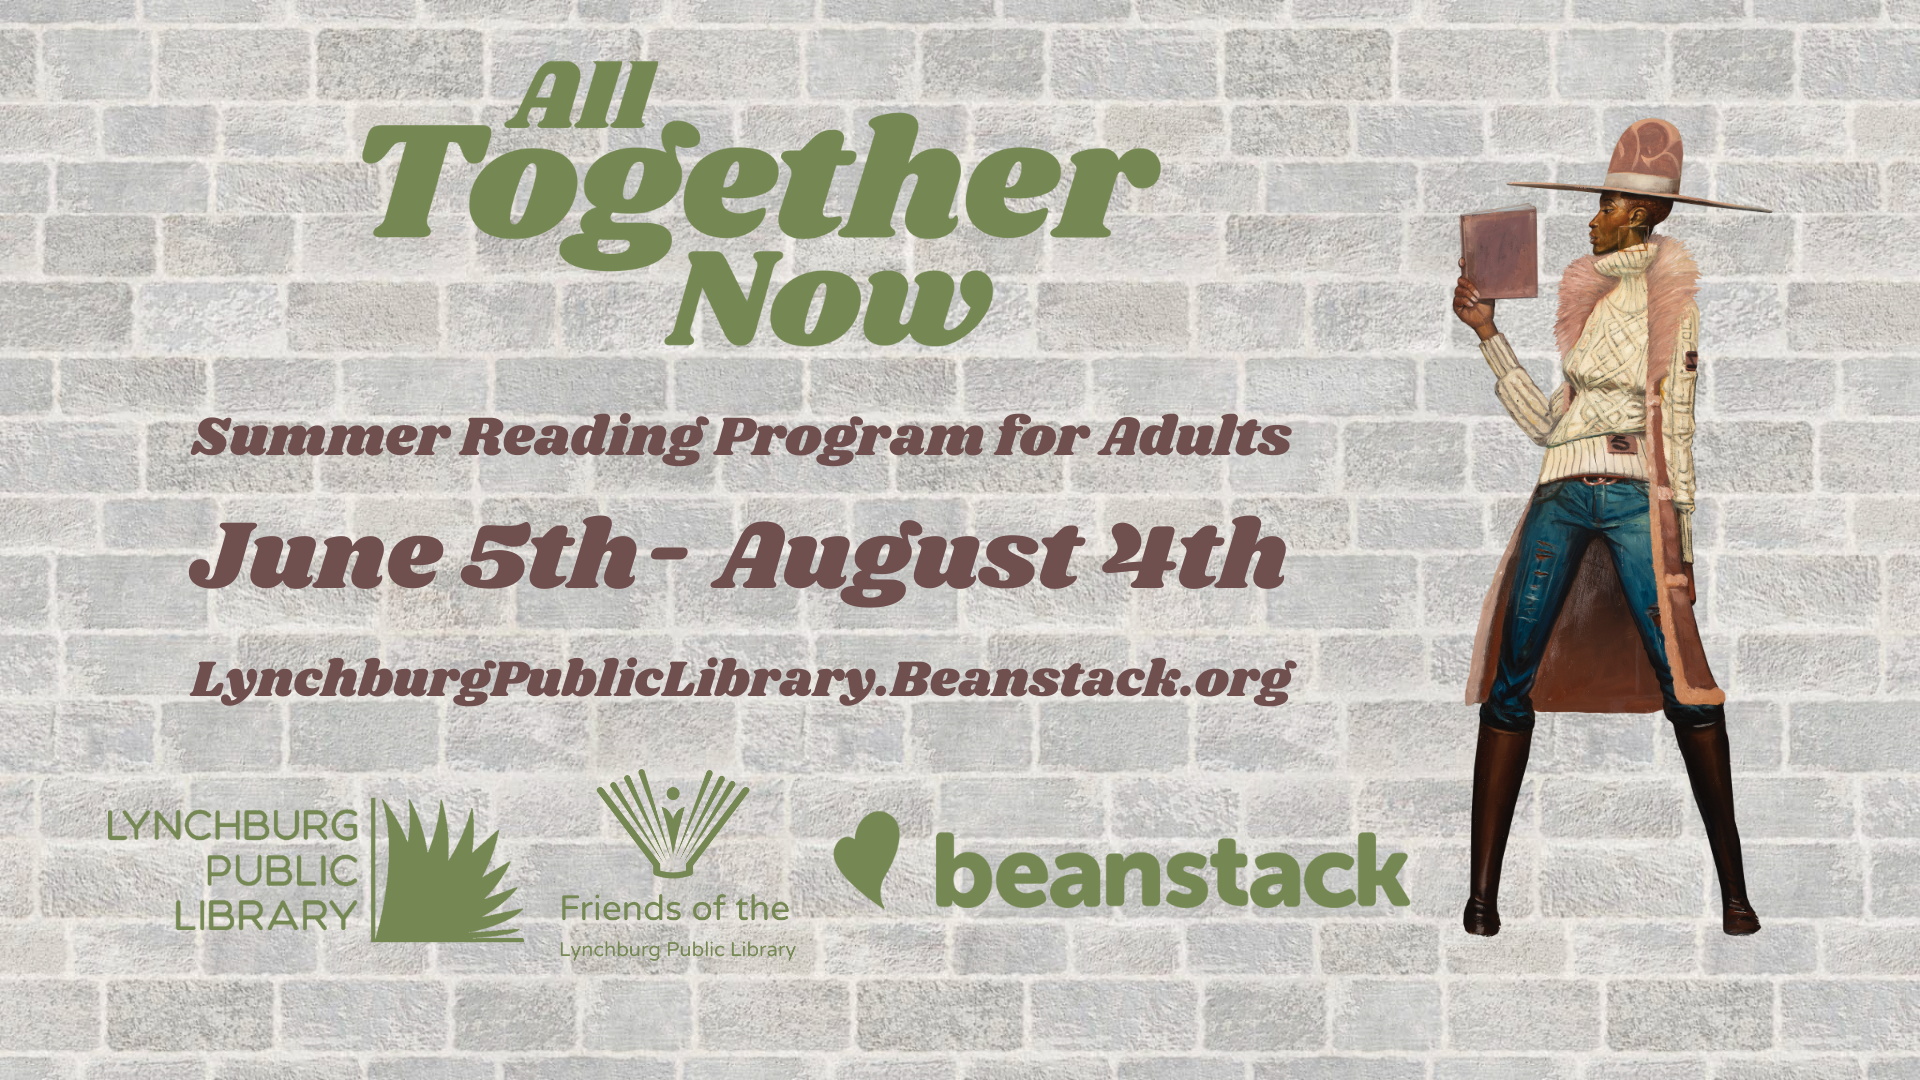 all together now summer reading program for adults; june 5th - august 4th; lynchburgpubliclibrary.beanstack.org